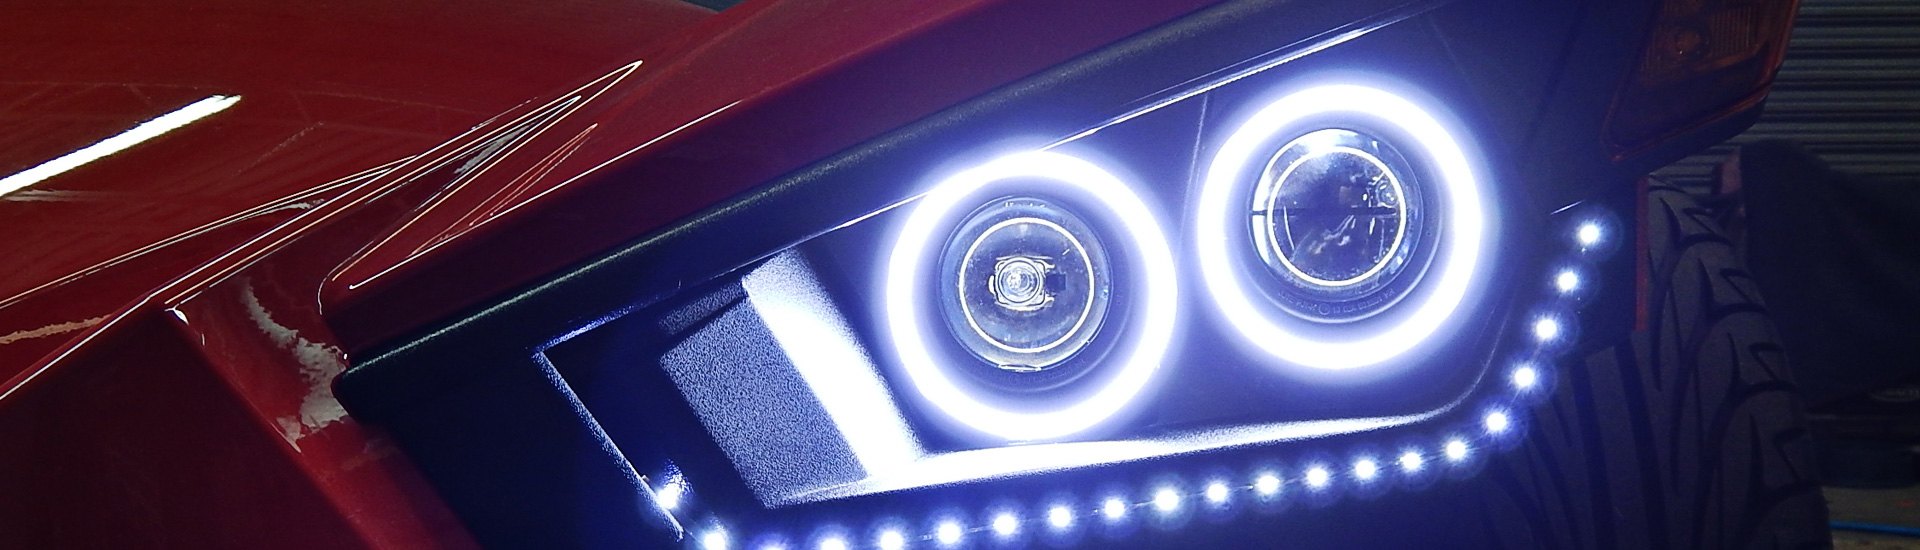 What Are The Different Types Of Halo Headlight Rings?